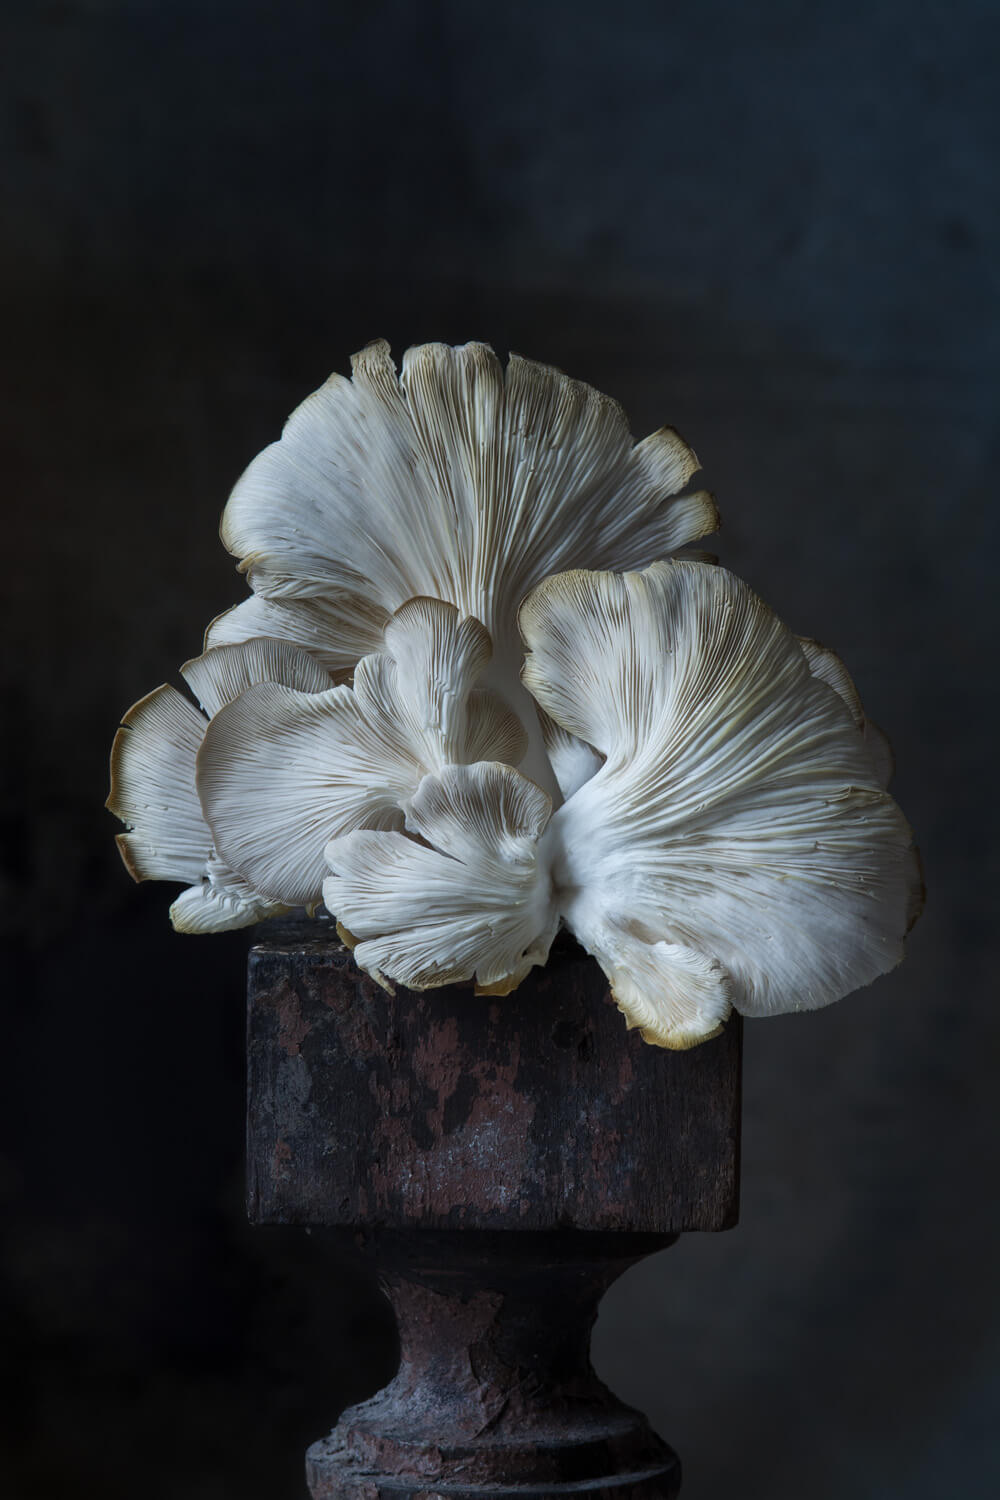 A cluster of delicate oyster mushrooms with gill-like structures and creamy tones stands artistically atop a rustic, dark iron pedestal, with a moody backdrop that accentuates the fungi's organic elegance and sculptural beauty.